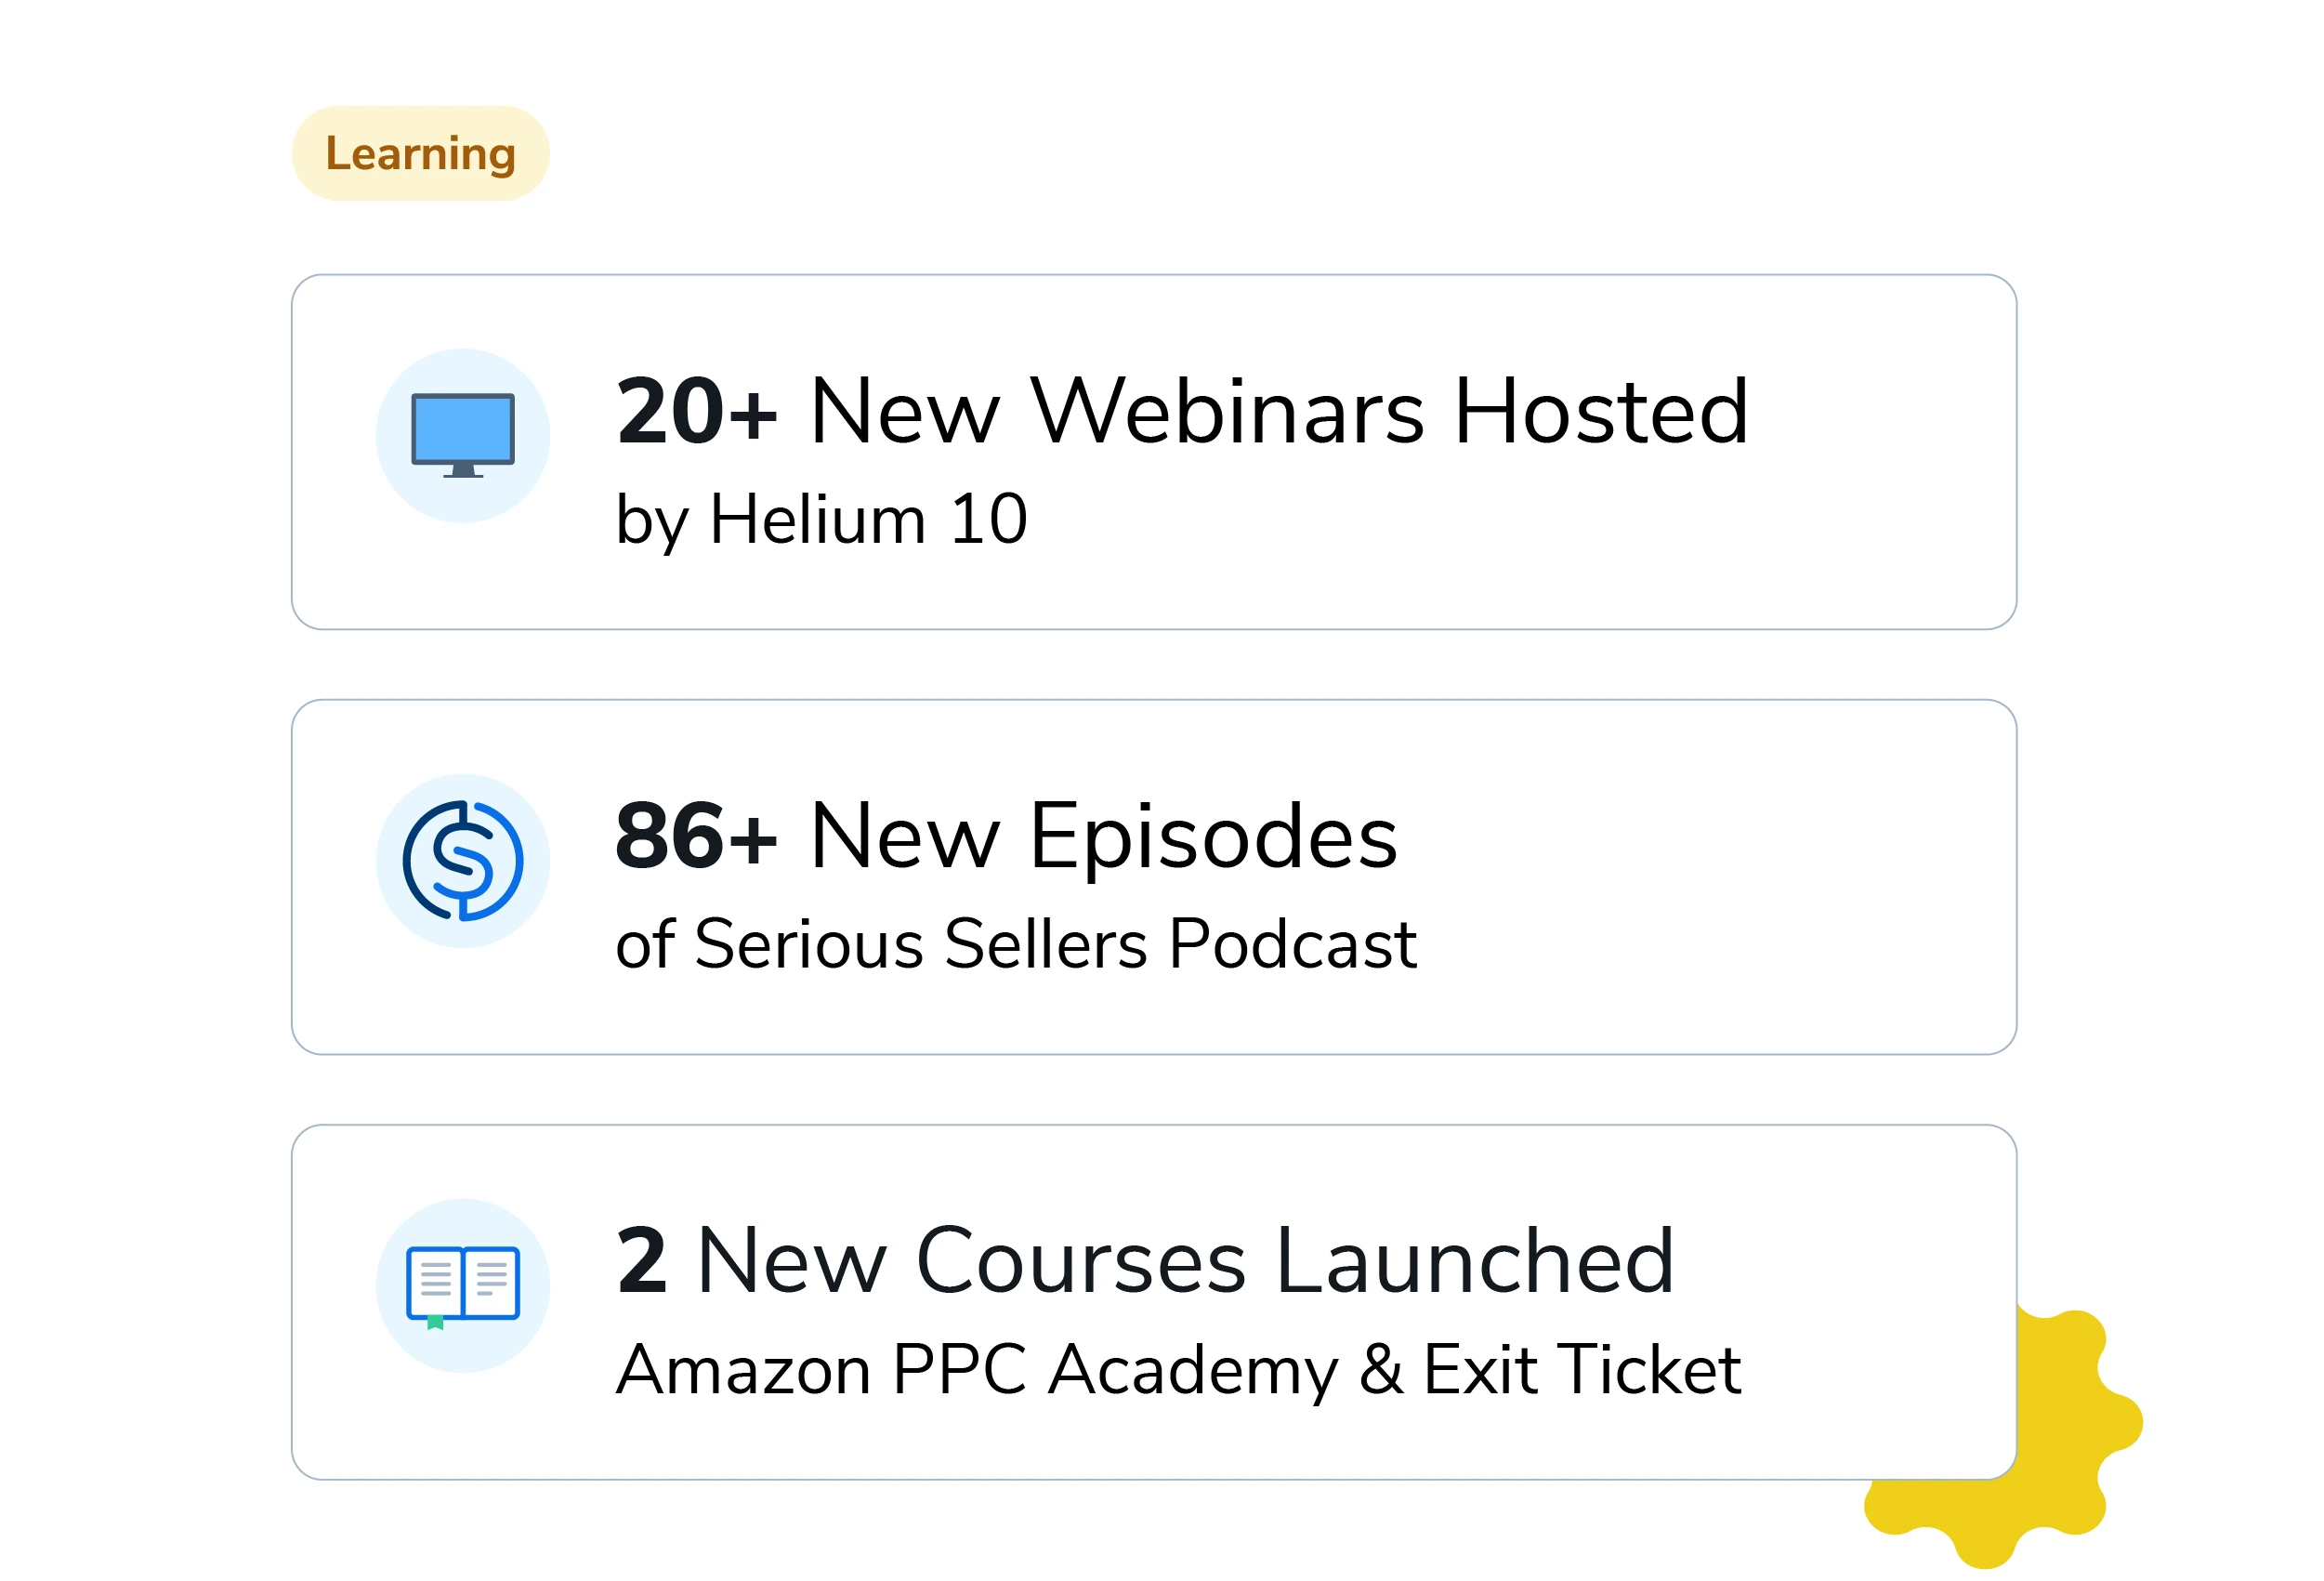 20+ new webinars hosted, 86+ new episodes, and 2 new courses launched